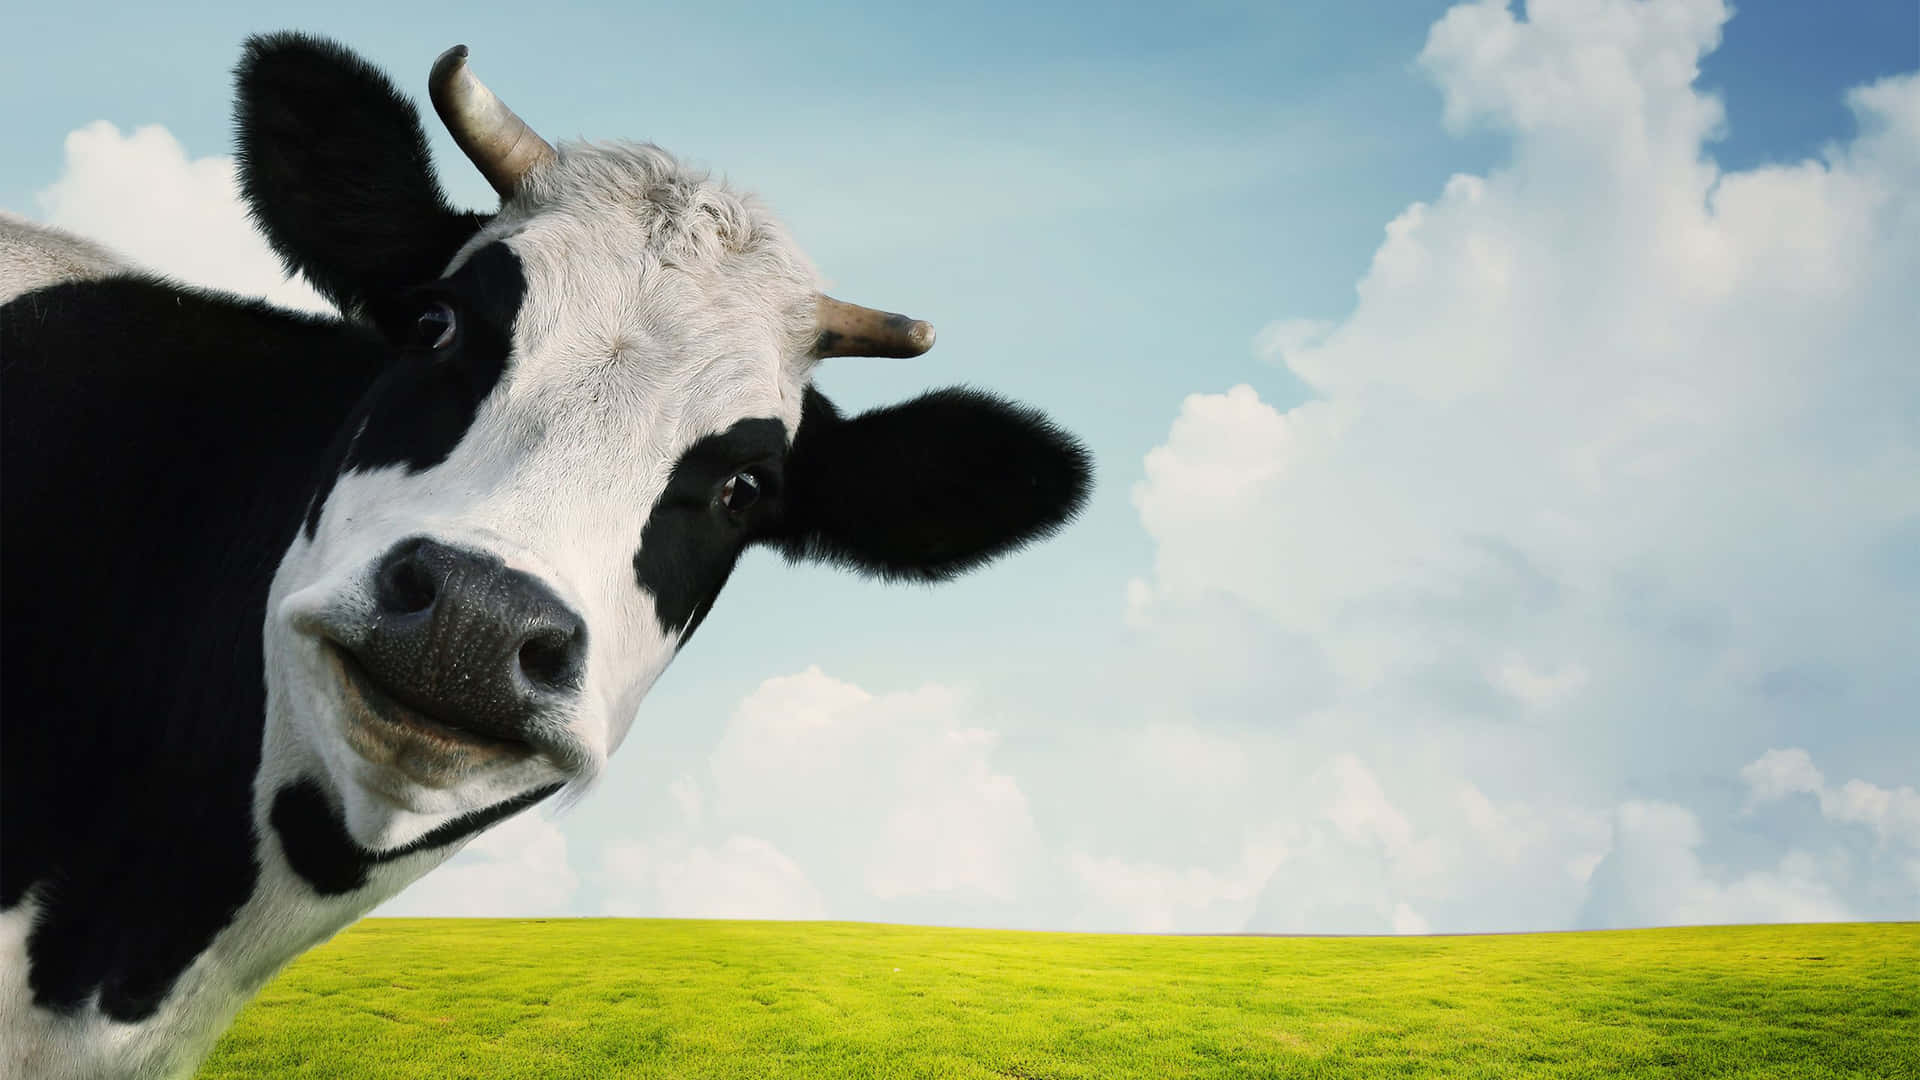 A Cow Is Standing In A Field With A Blue Sky Wallpaper